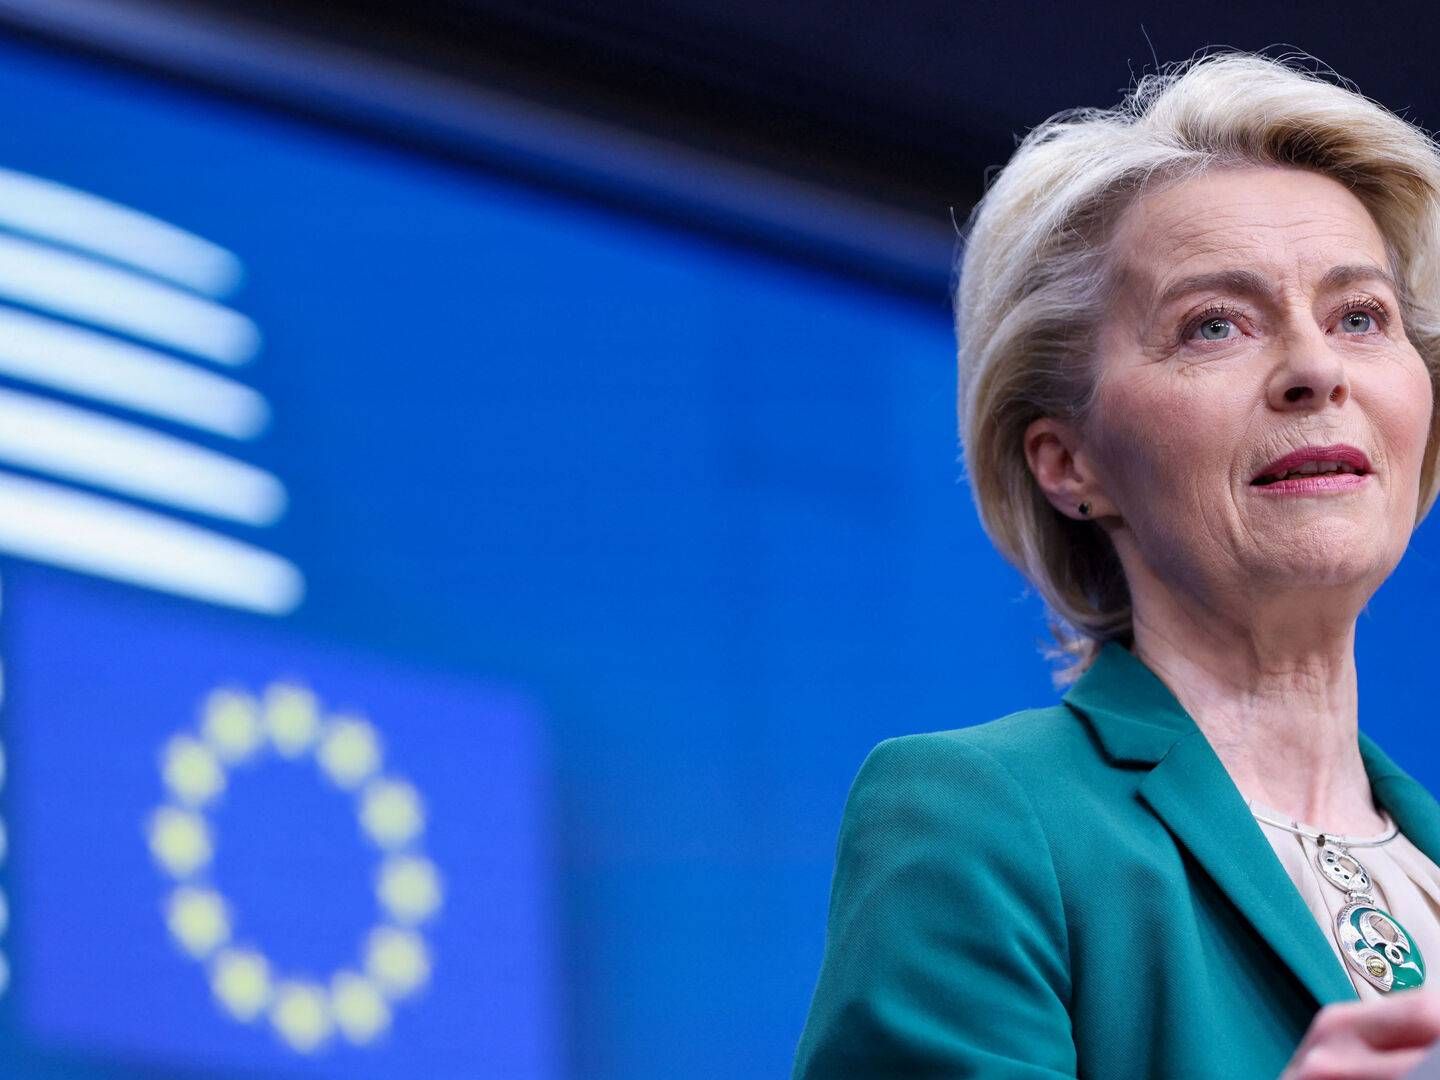 She has led the European Commission through electricity market reform, an energy crisis and increasing state aid pressure from the US. Now Ursula von der Leyen is reportedly set for another five years as head of the EU's powerful civil service. | Foto: Johanna Geron/Reuters/Ritzau Scanpix